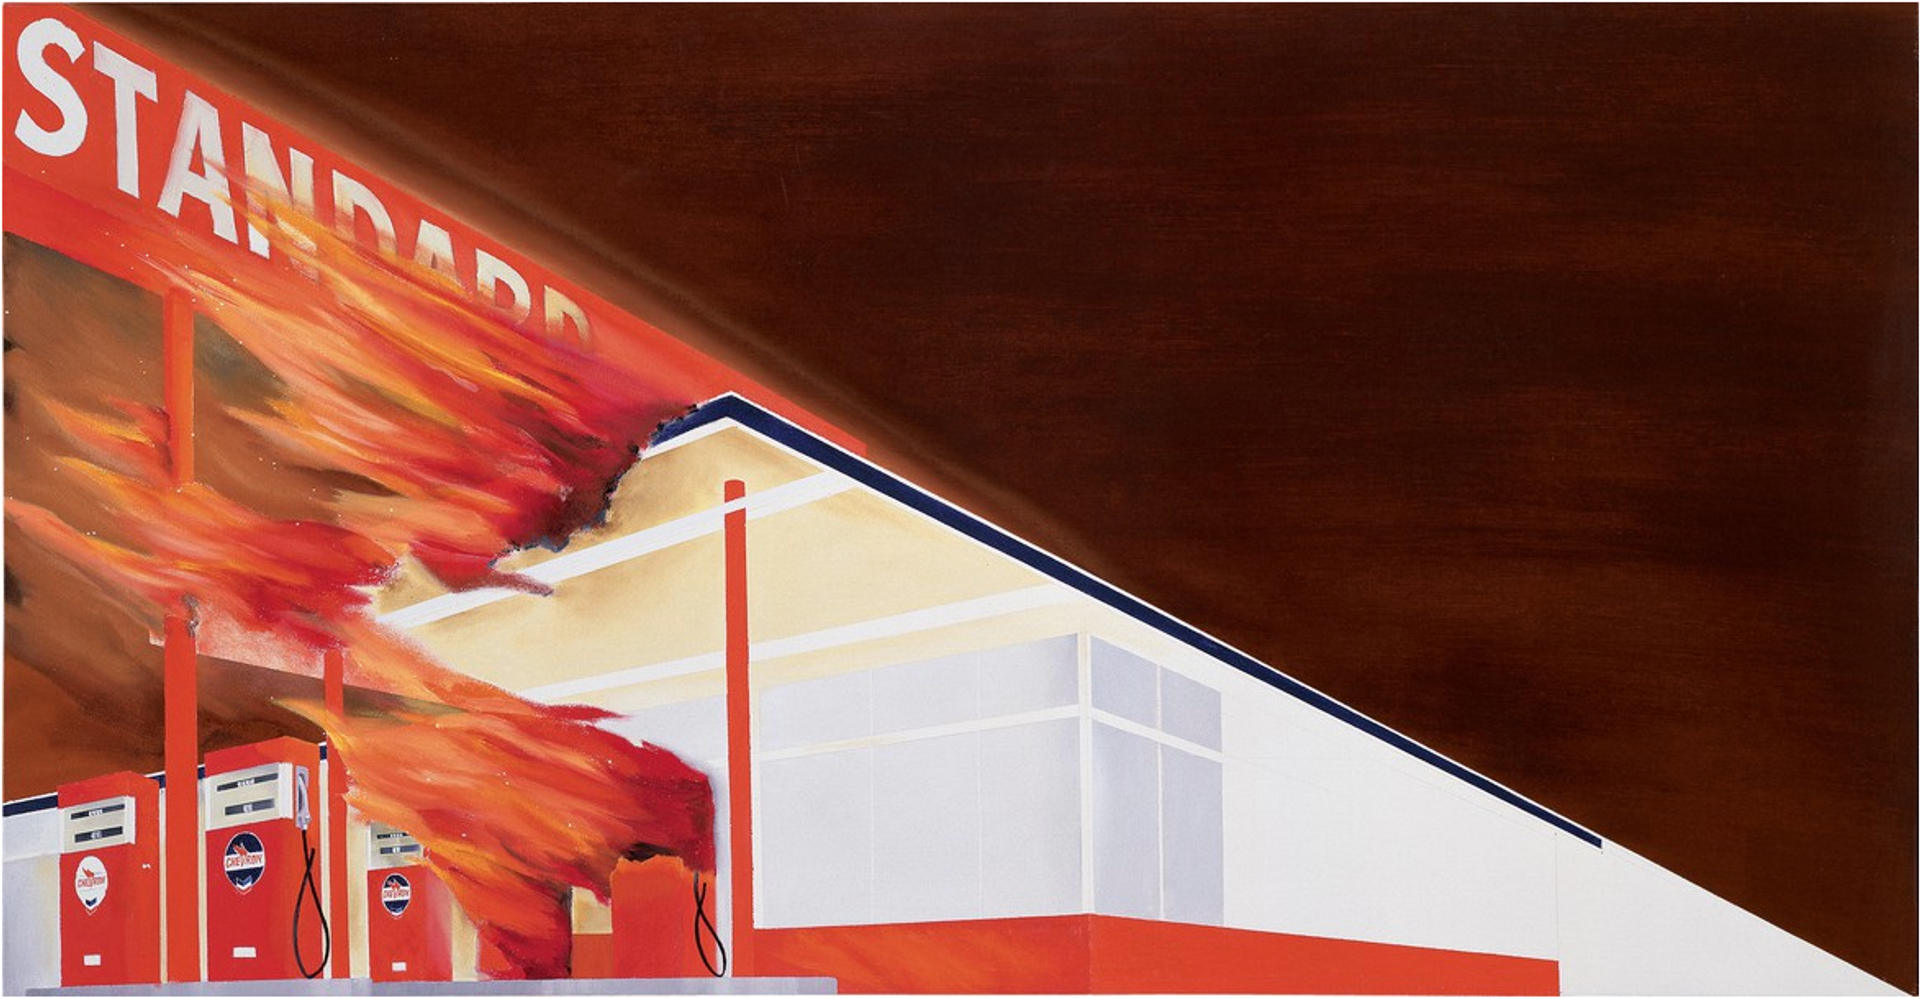 Burning Gas Station by Ed Ruscha